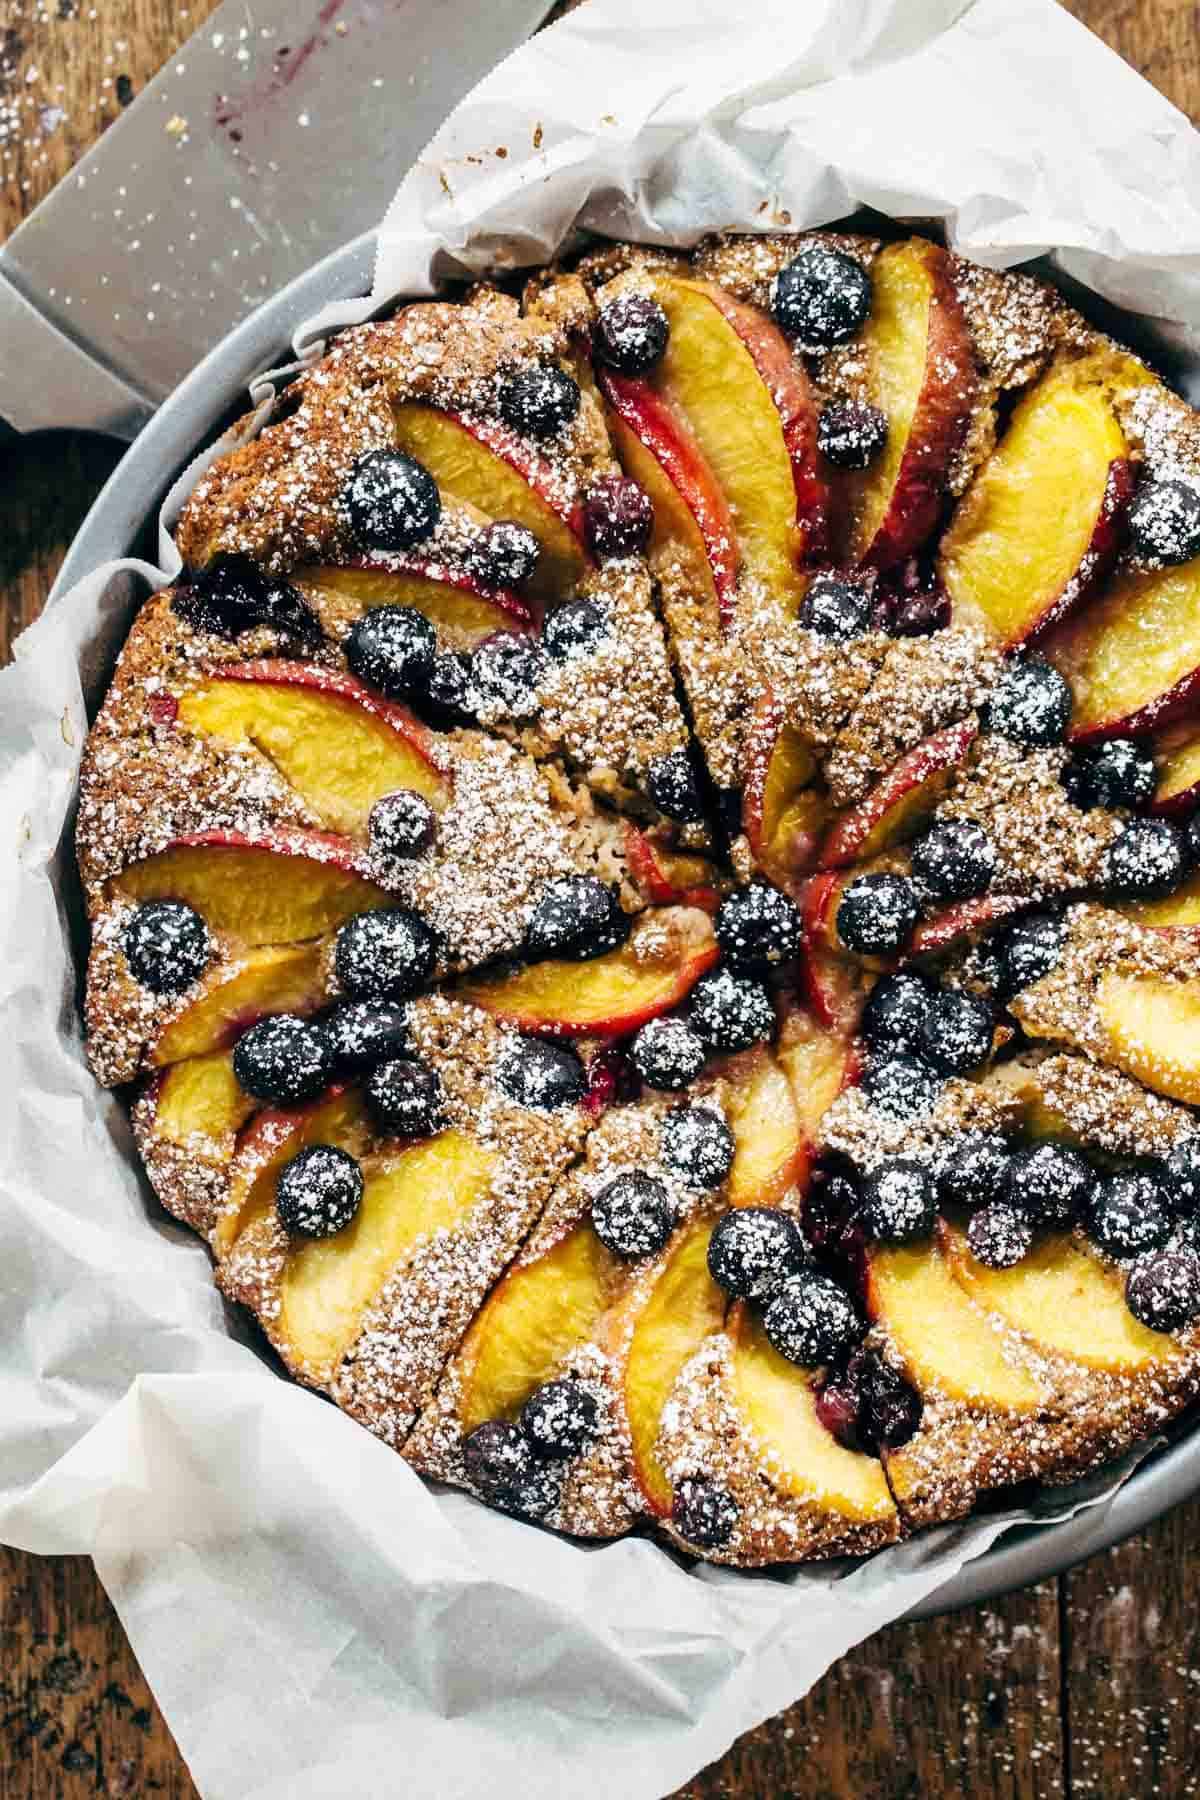 A dessert baked with fruit and powdered sugar on top.